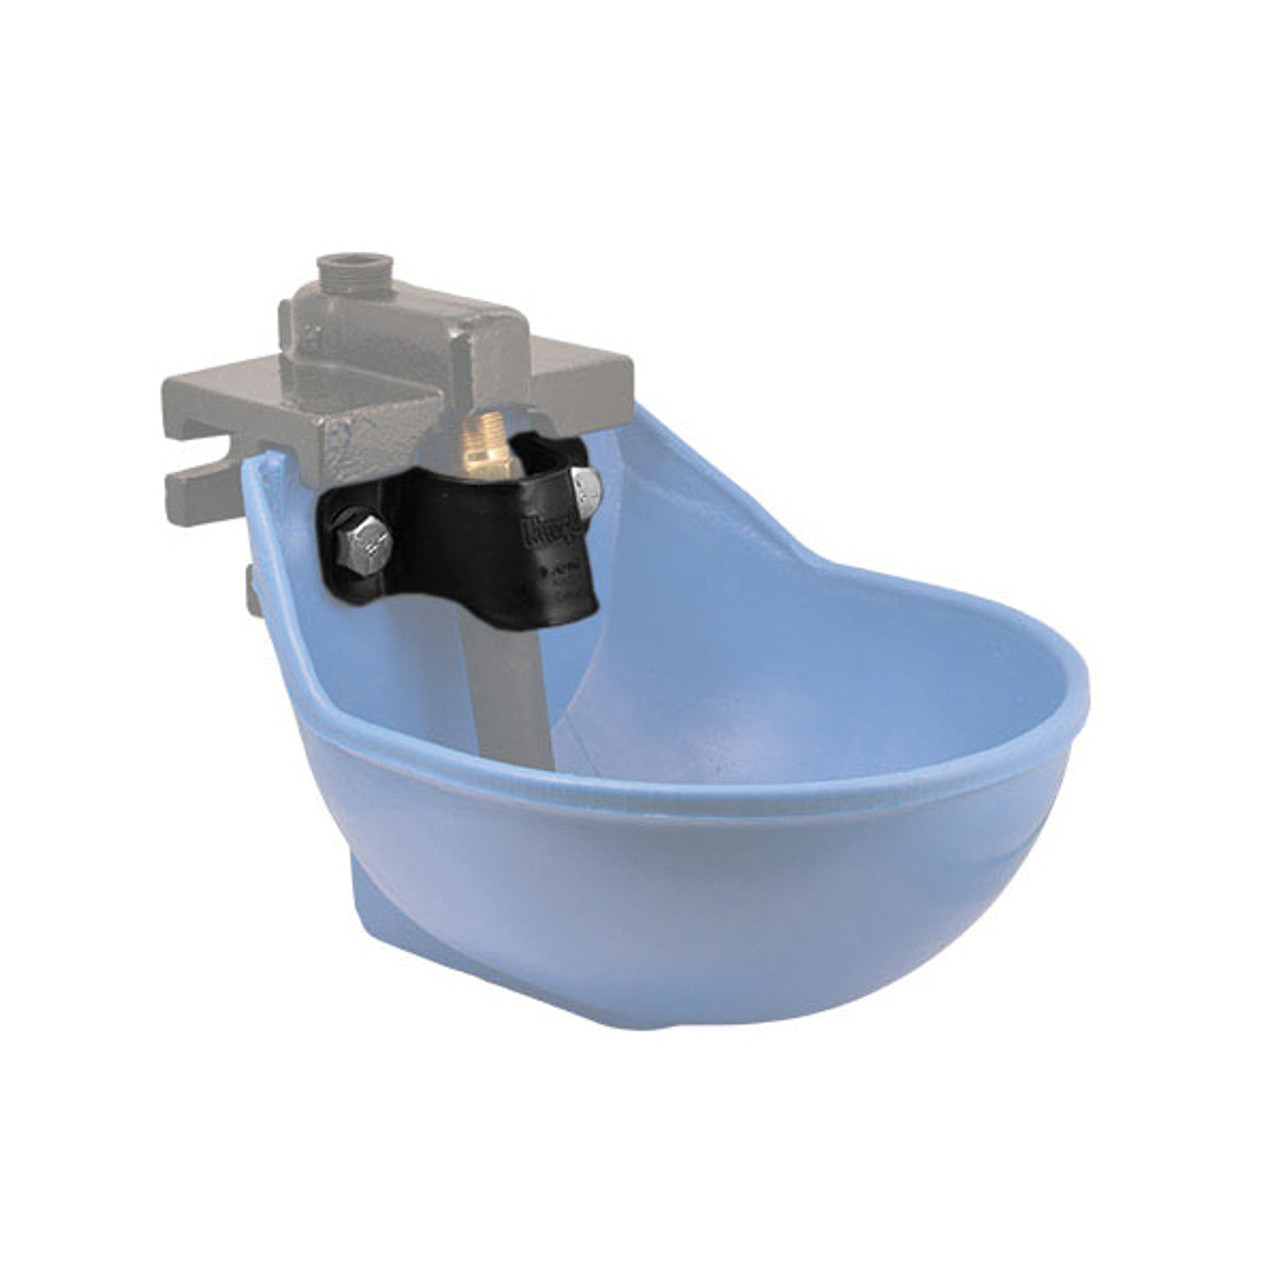 rigidity use mixer Nose Guard for AU Series Water Bowl